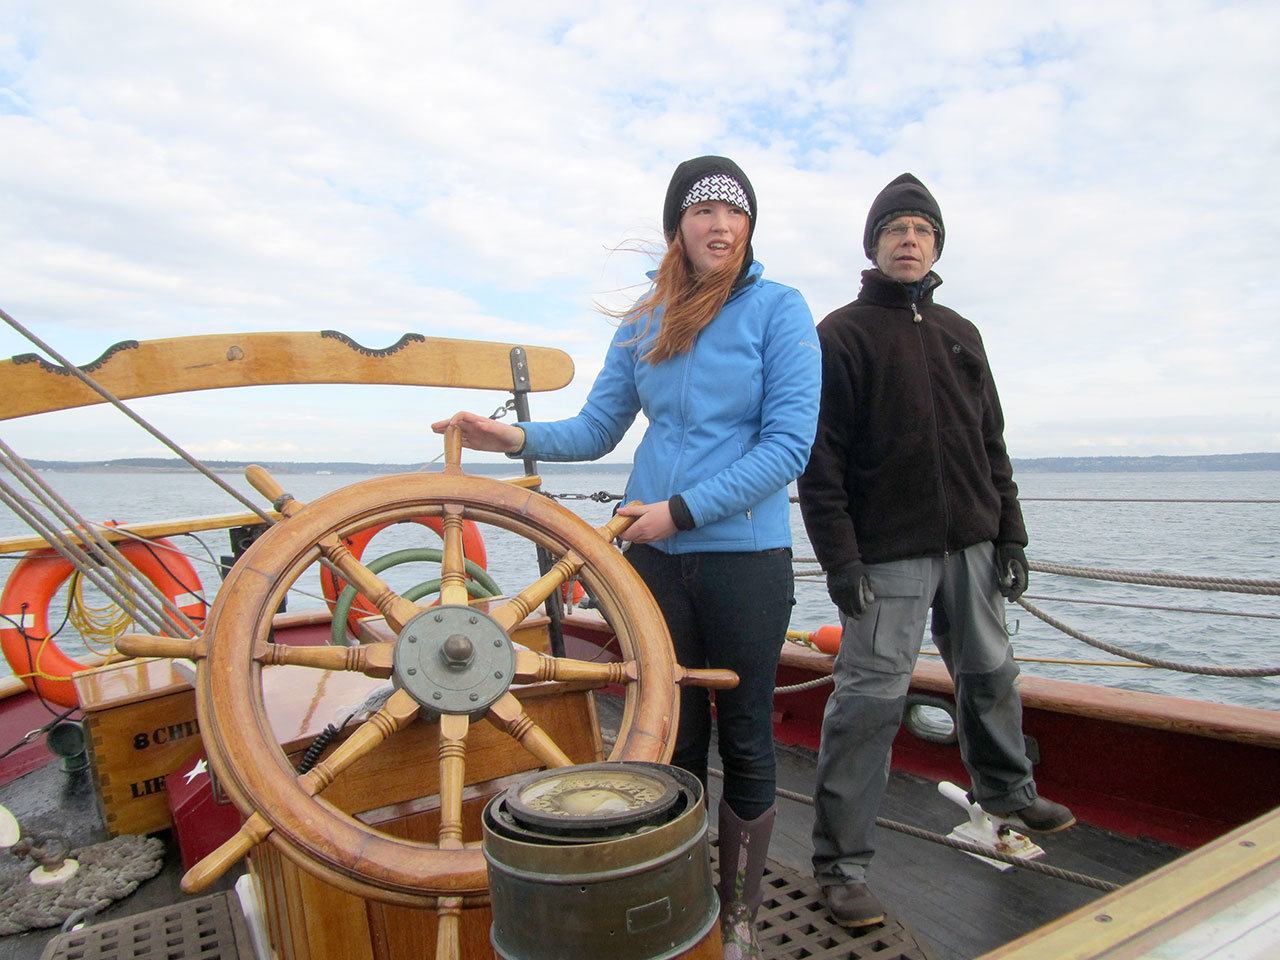 Students from Port Townsend High School spent a night sailing on the Adventuress out of Port Townsend on a field trip as part of the district’s Maritime Discovery Initiative. (Kelley Watson/Port Townsend High School)